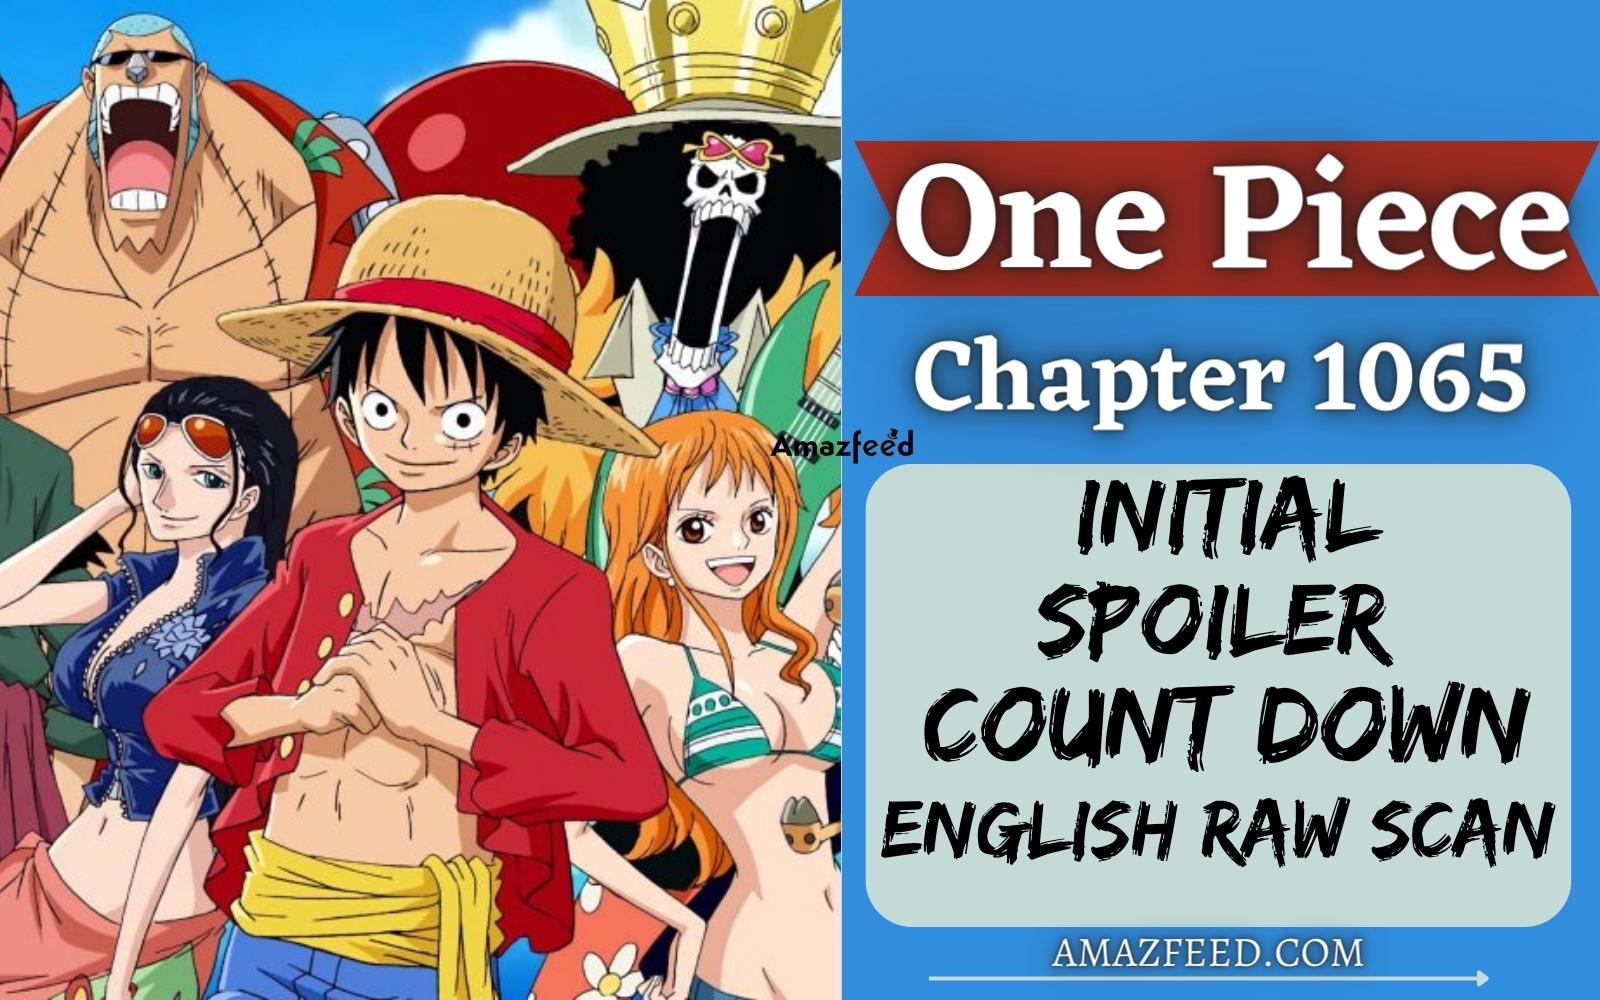 One Piece Chapter 1065 Initial Reddit Spoilers, Count Down, English Raw Scan, Release Date